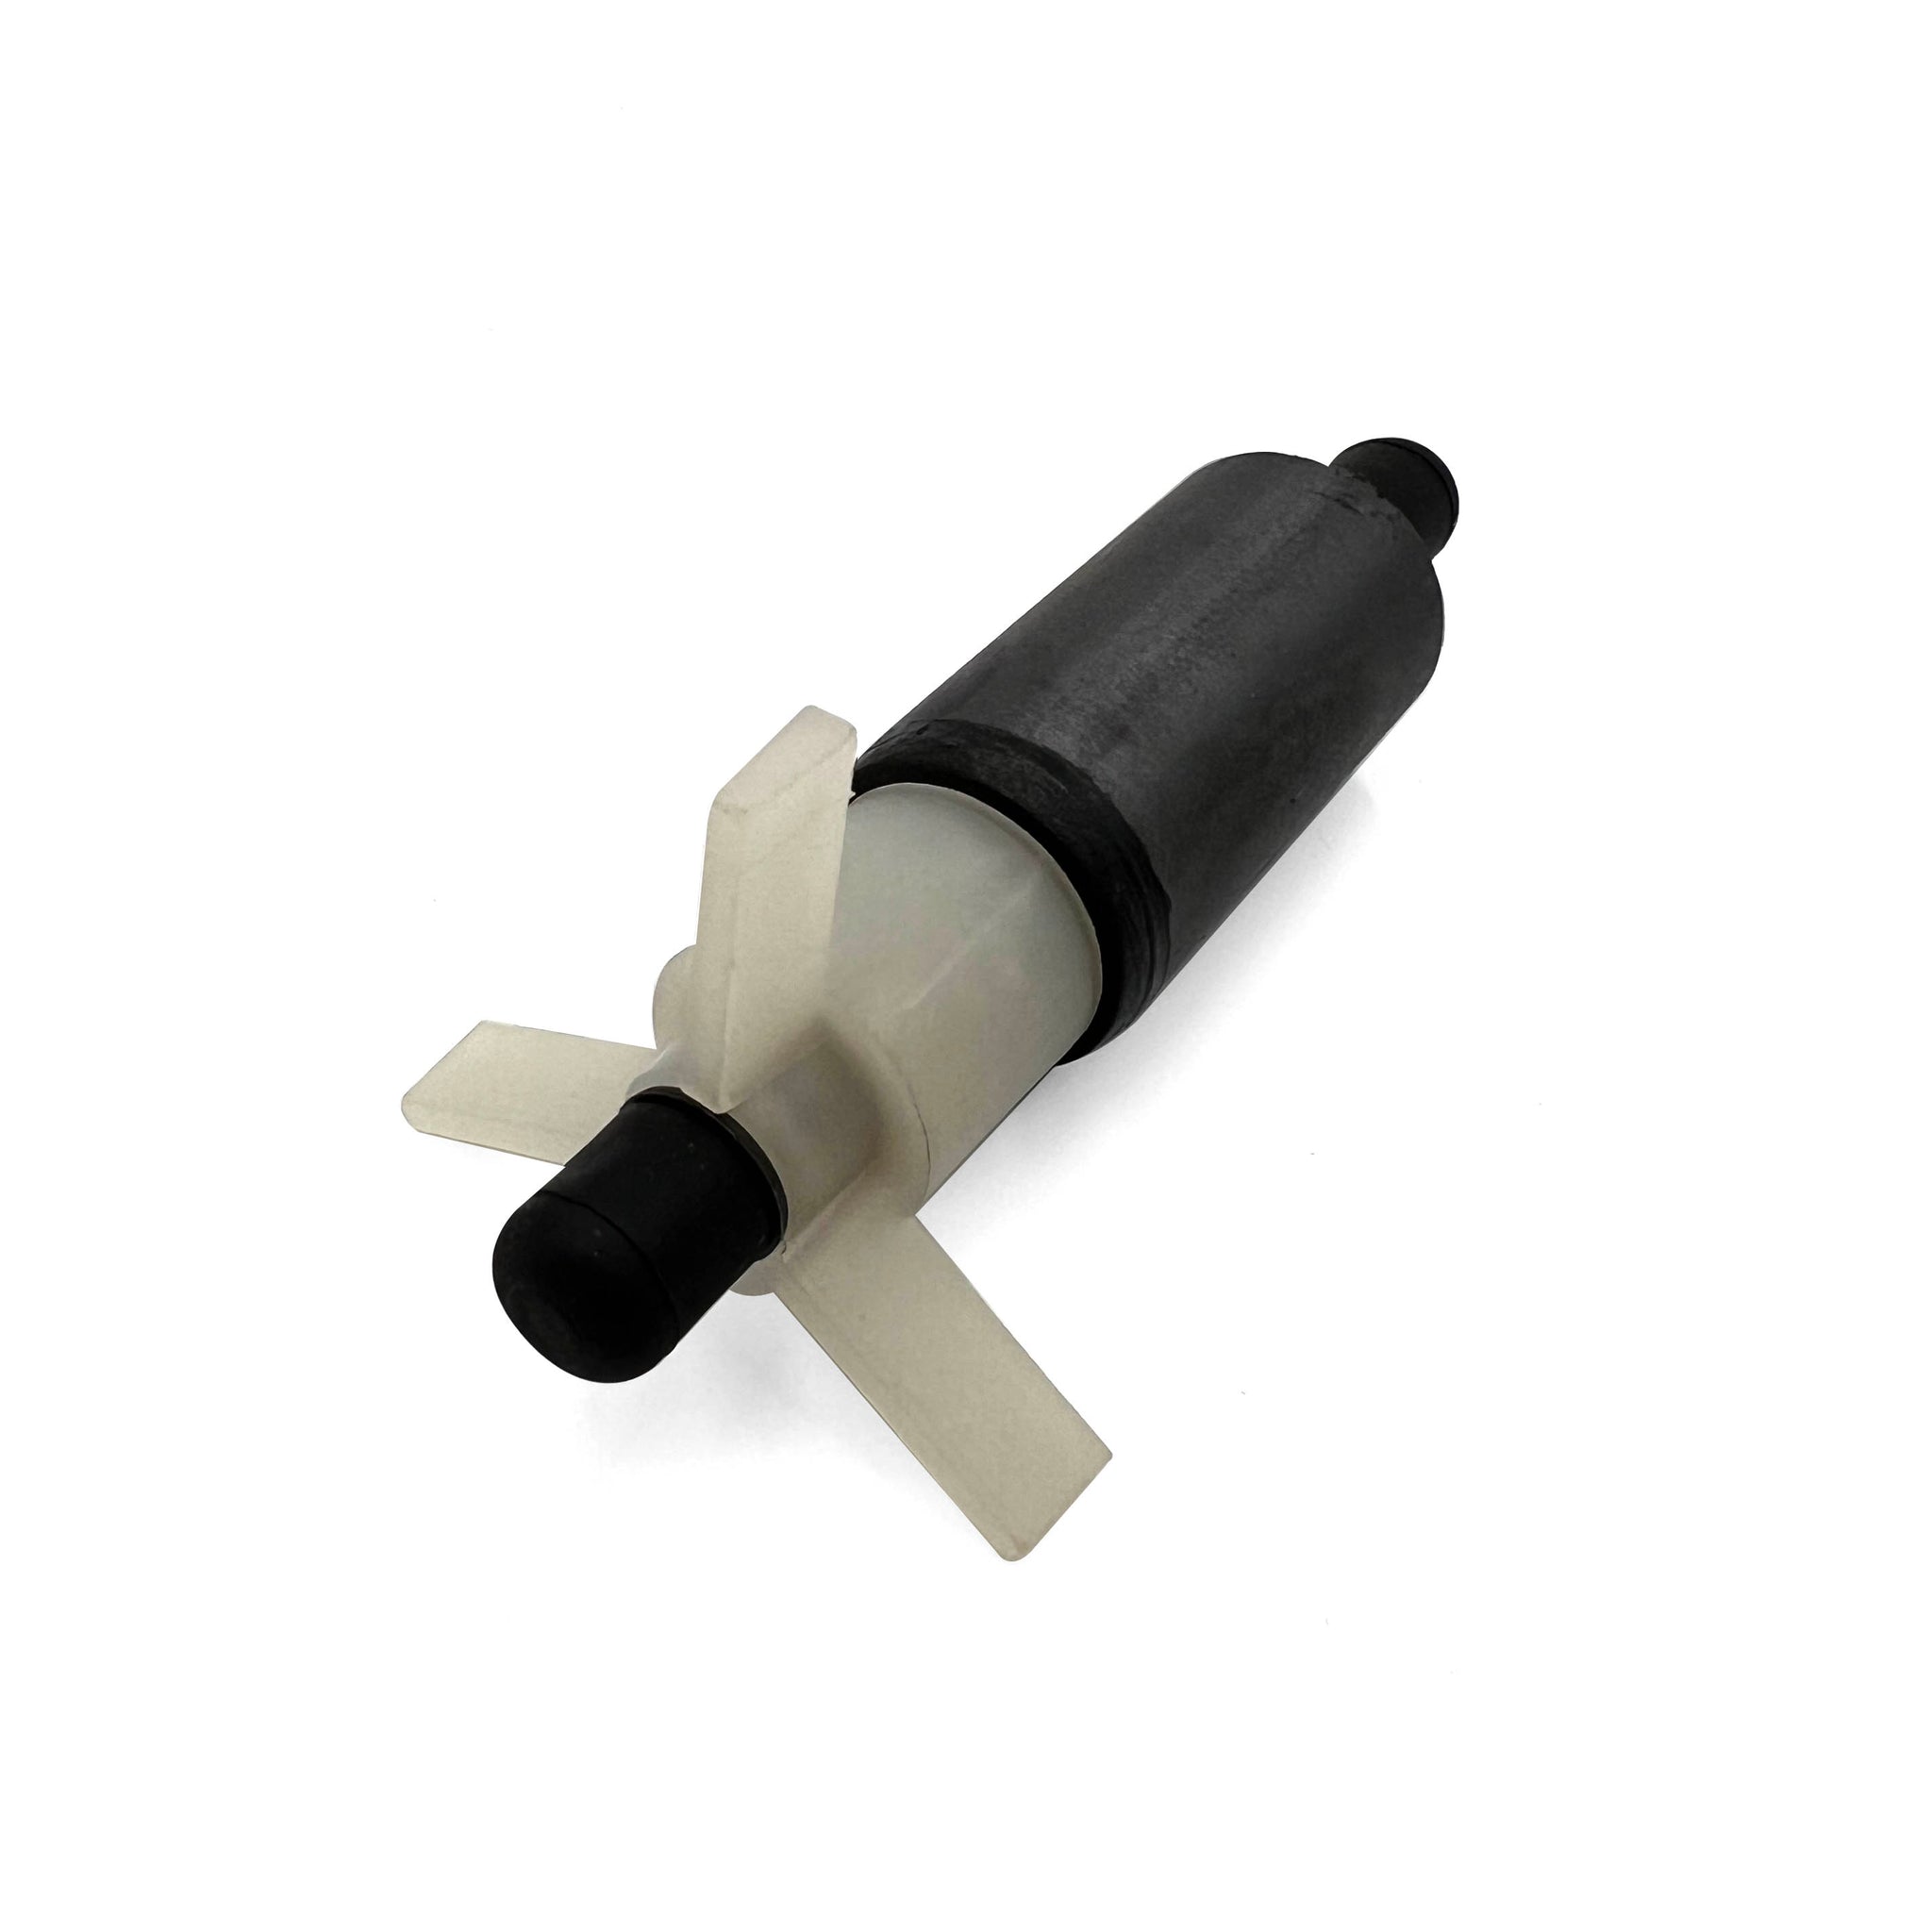 REPLACEMENT IMPELLER ASSEMBLY FOR COVER-CARE 350 PUMP